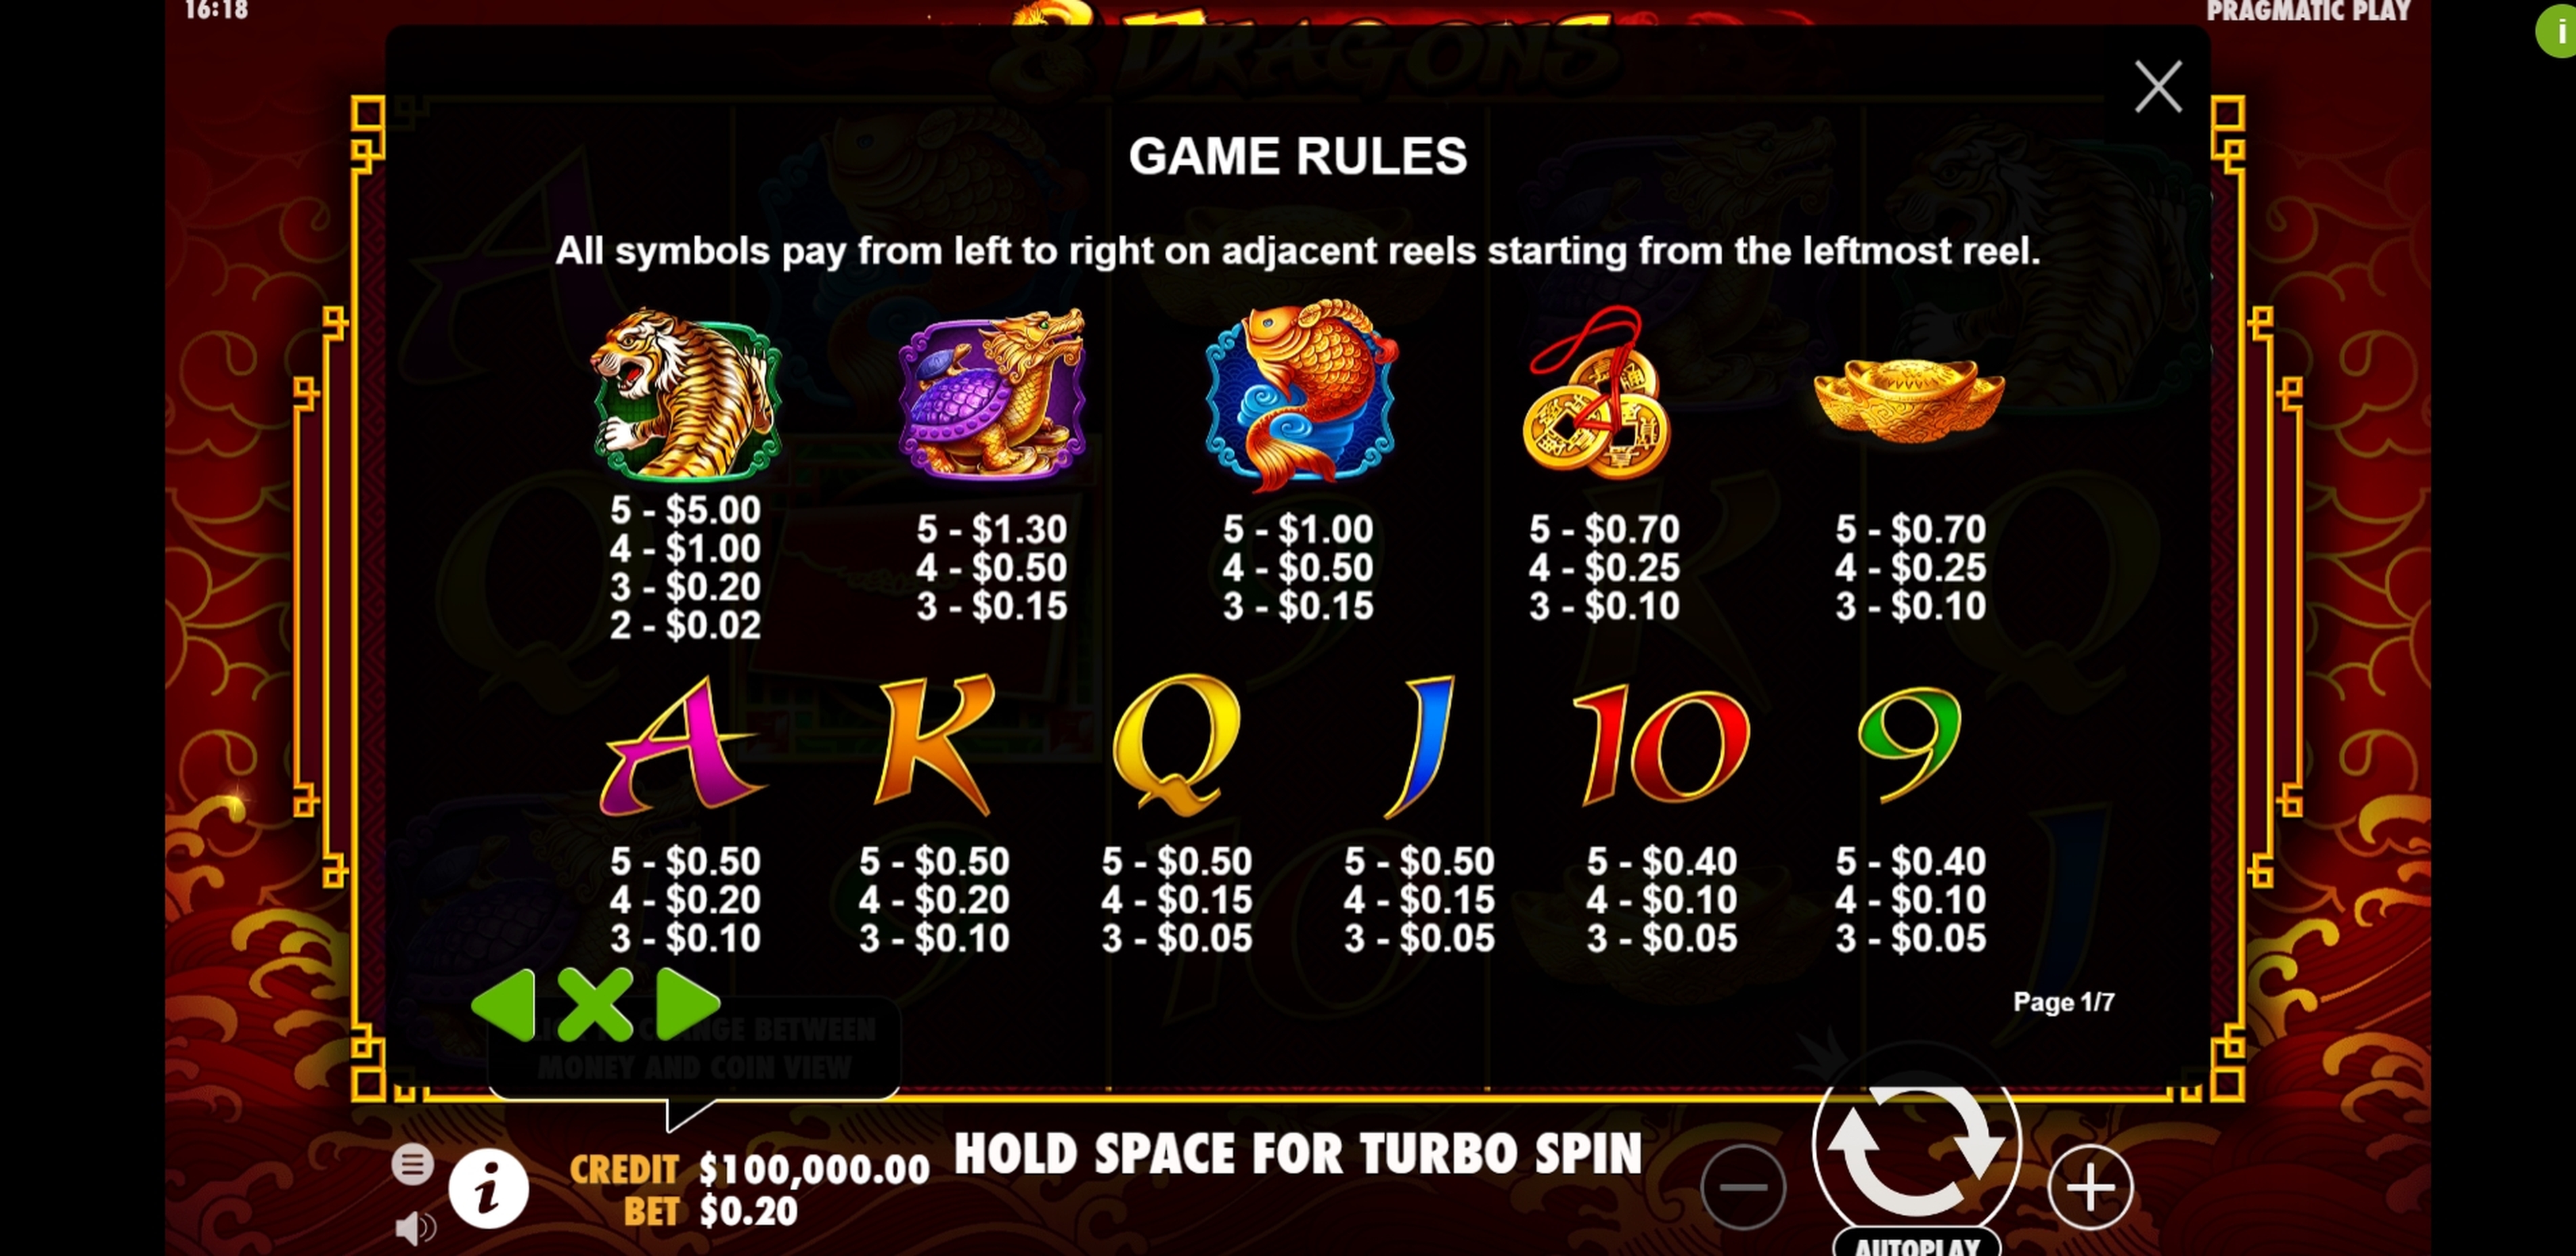 Info of 8 Dragons Slot Game by Pragmatic Play